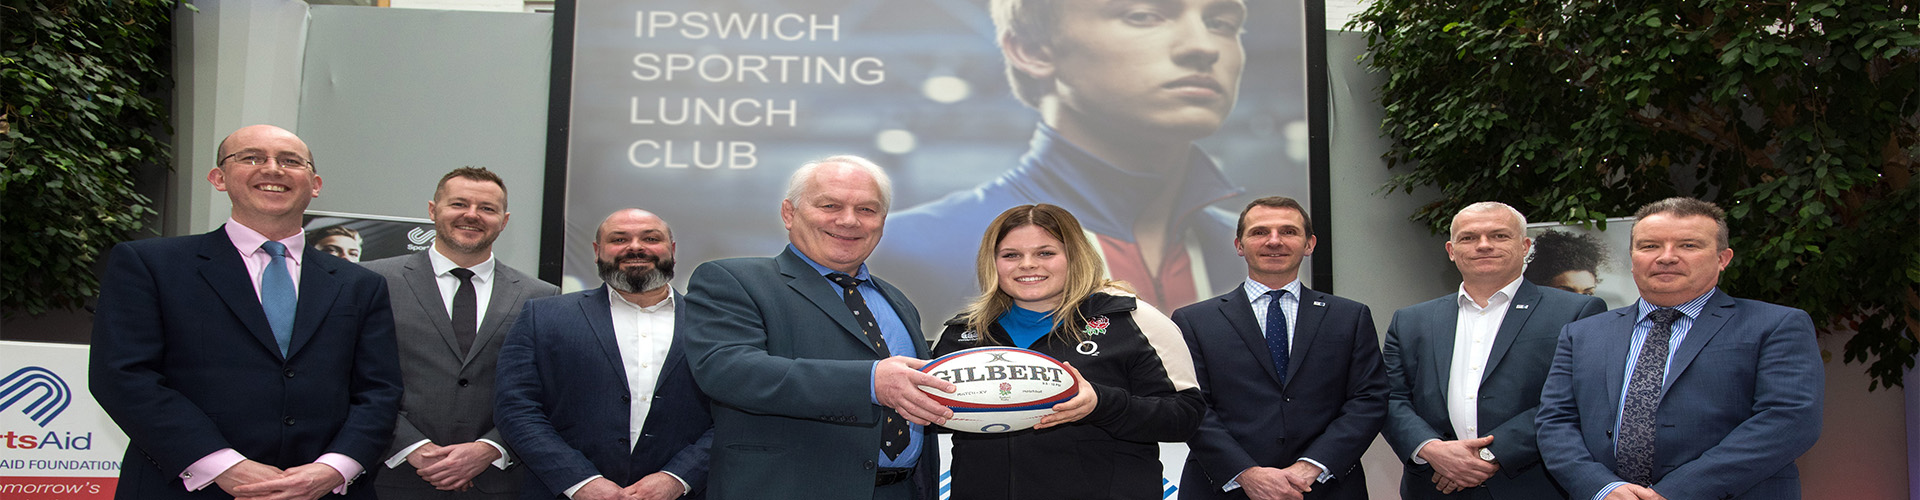 Becketts join the sponsors investing in county’s sporting future